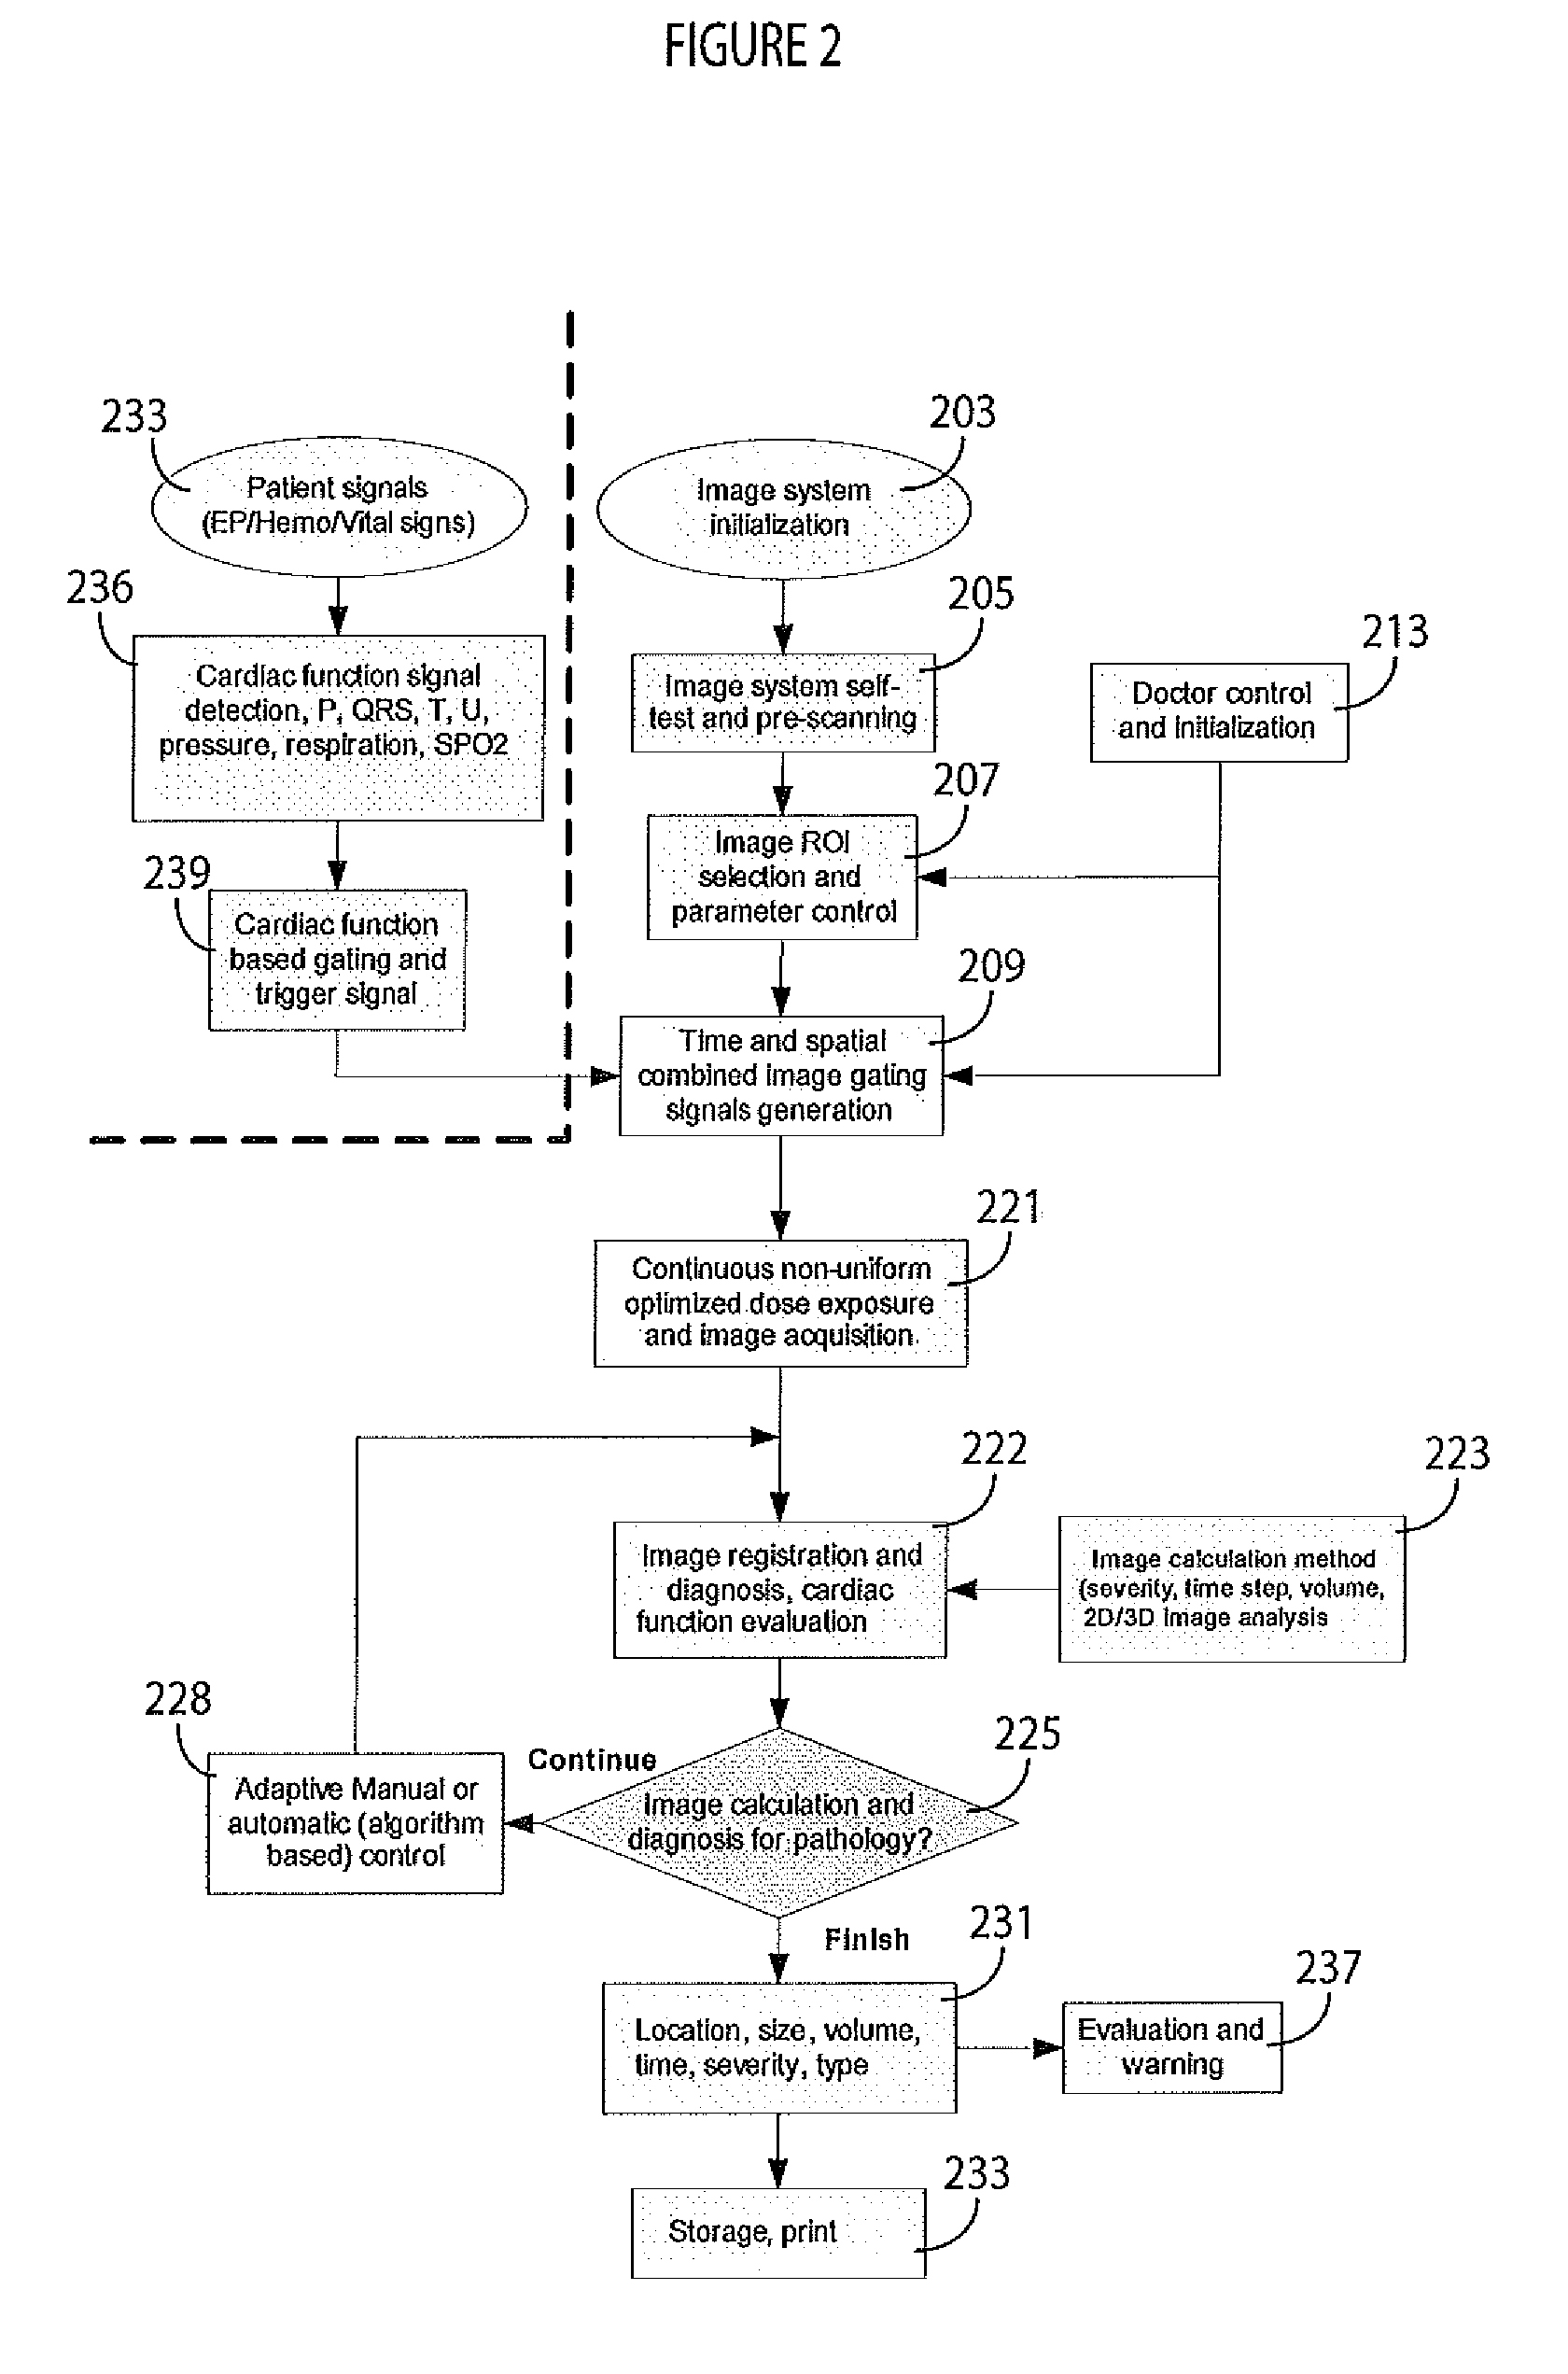 System for image scanning and acquisition with low-dose radiation